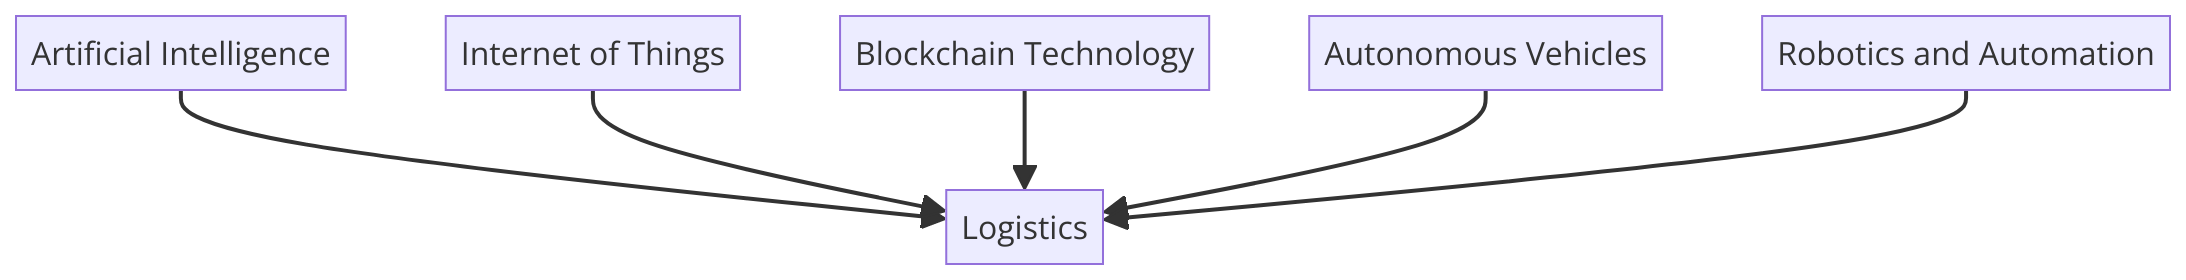 Innovations Shaping the Future of Logistics